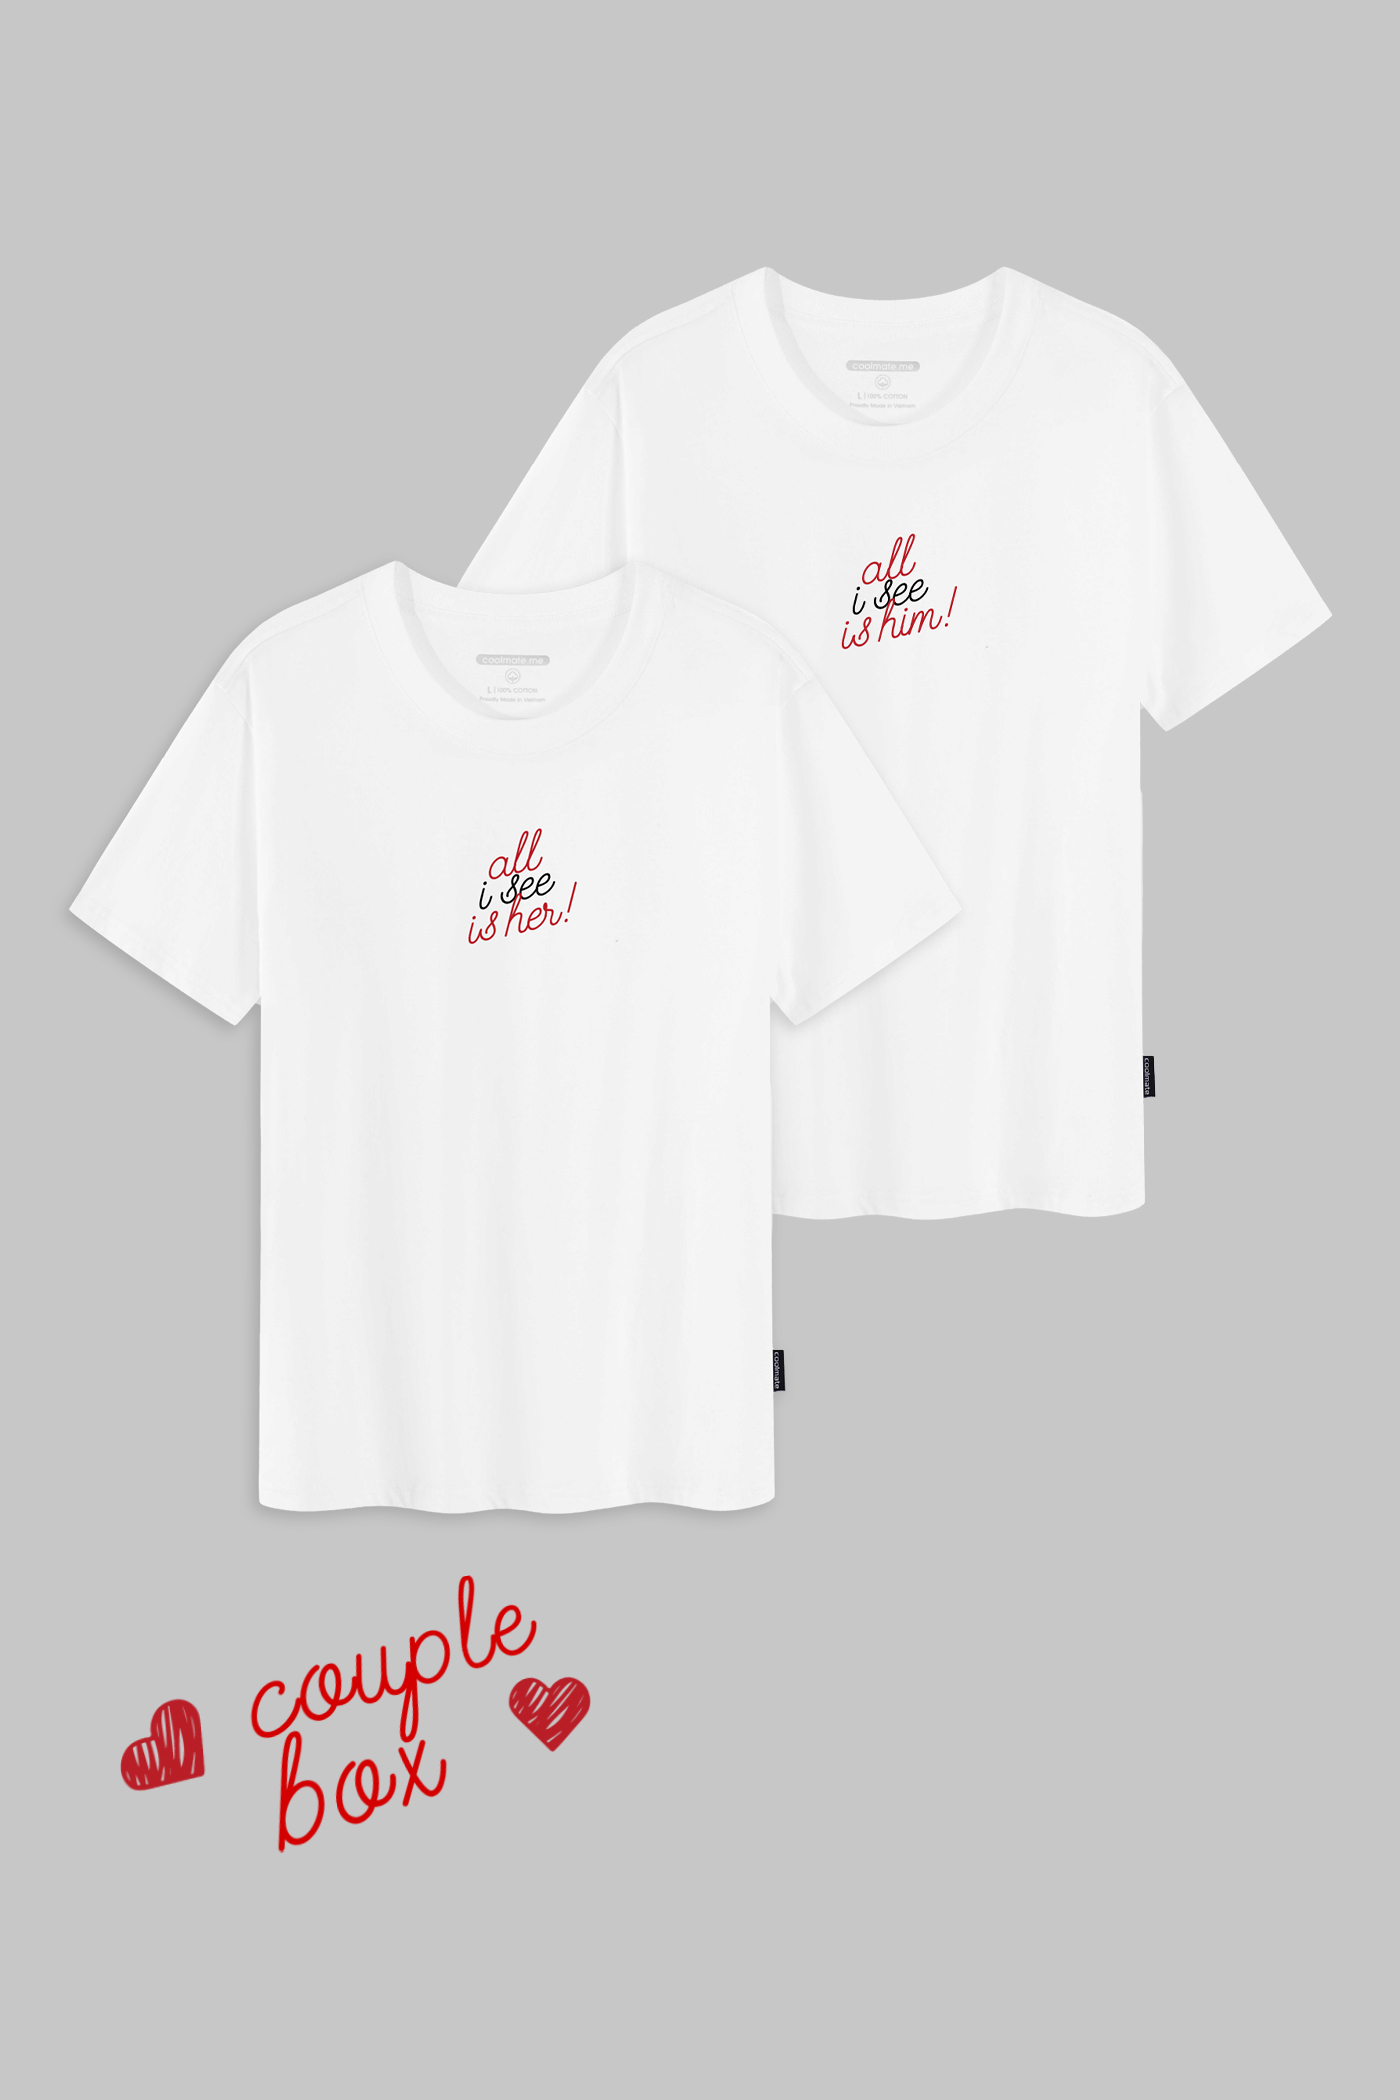 Couple Box - Combo 2 Áo thun Cotton Basics 200gsm in All I see is him/her Trắng